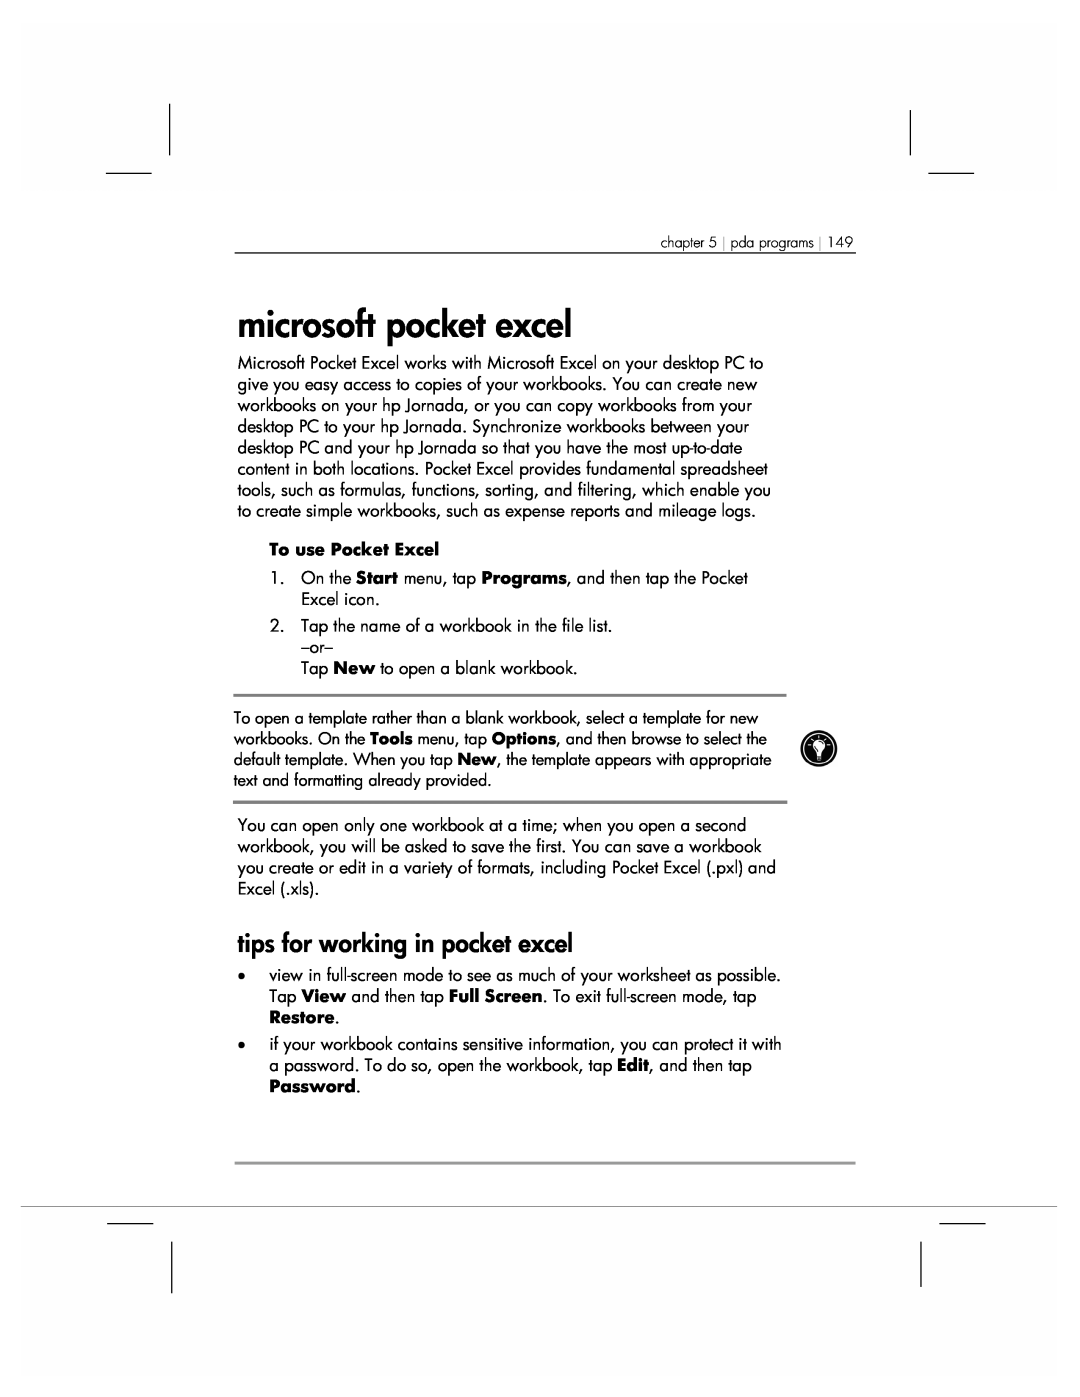 HP 920 manual microsoft pocket excel, tips for working in pocket excel 